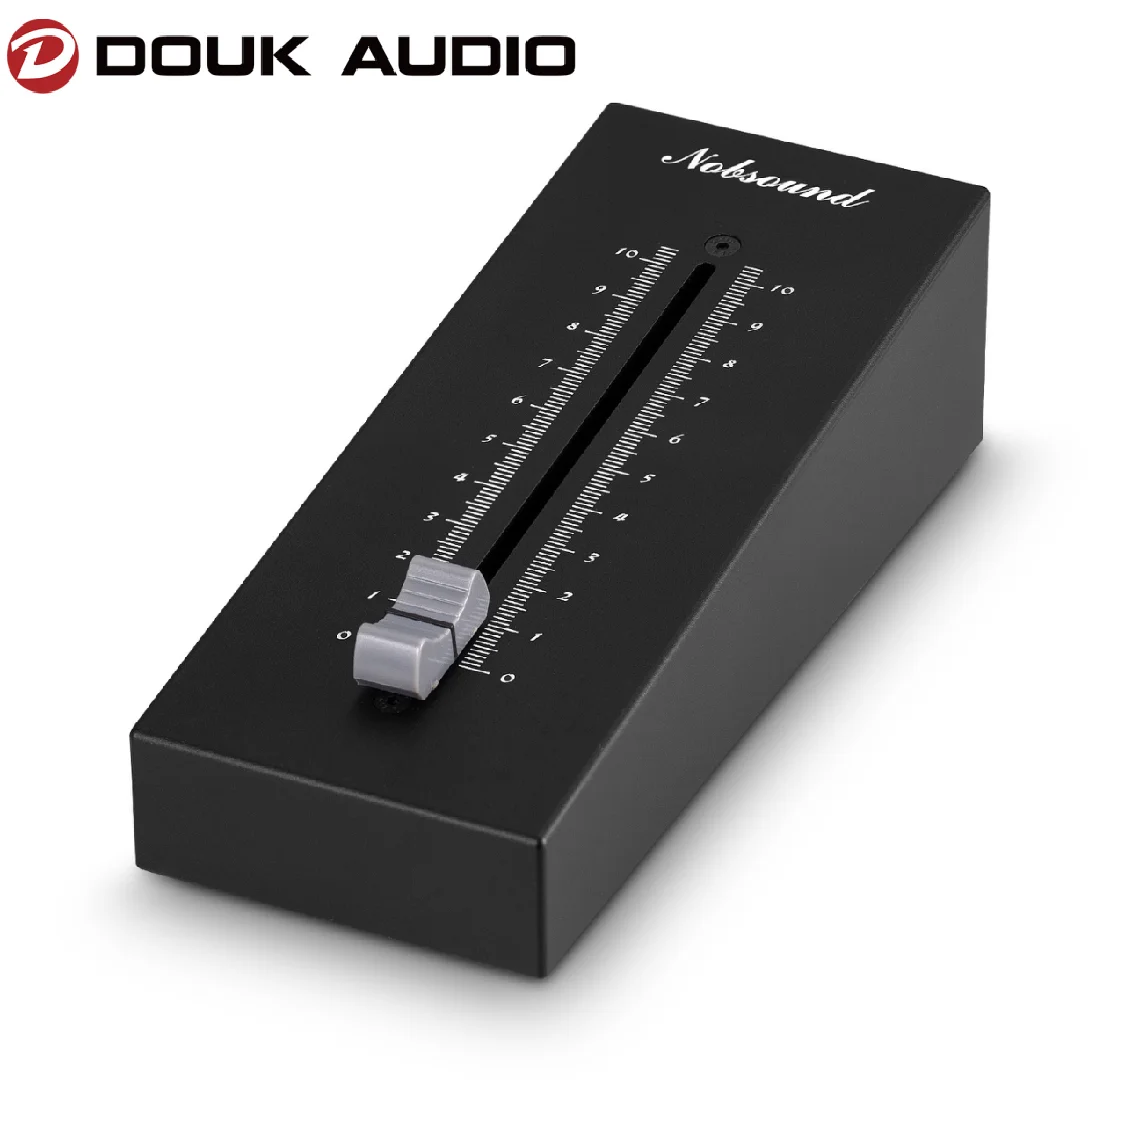 

Douk Audio Mini Digital Stereo Pre-Amplifier Passive Preamp Lossless Audio Volume Controller for Amplifiers / Active Speakers